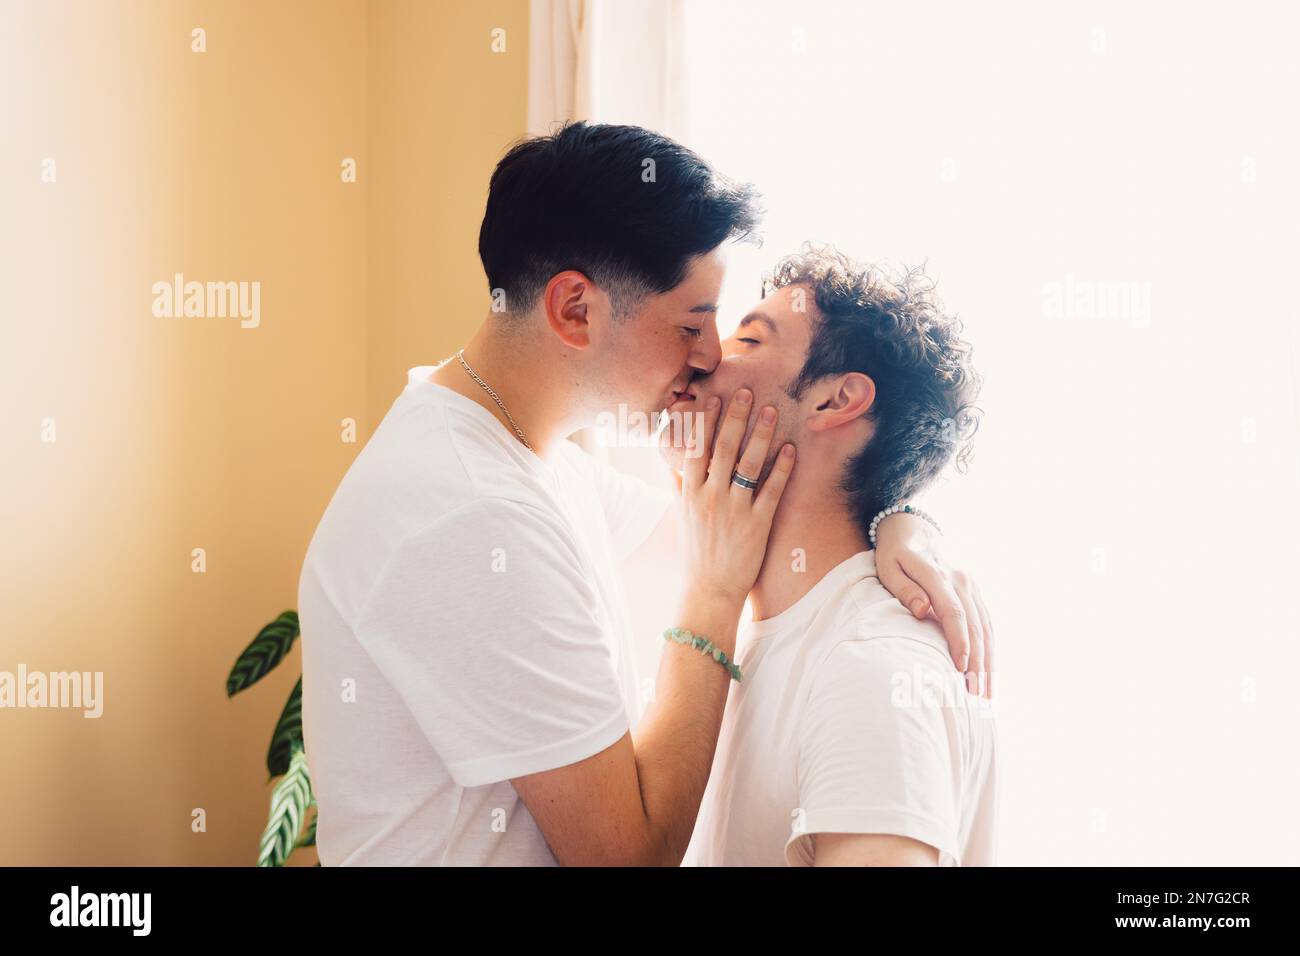 Gay couple romantically kissing on the mouth, in the living room. LGBT relationship and routine. Stock Photo